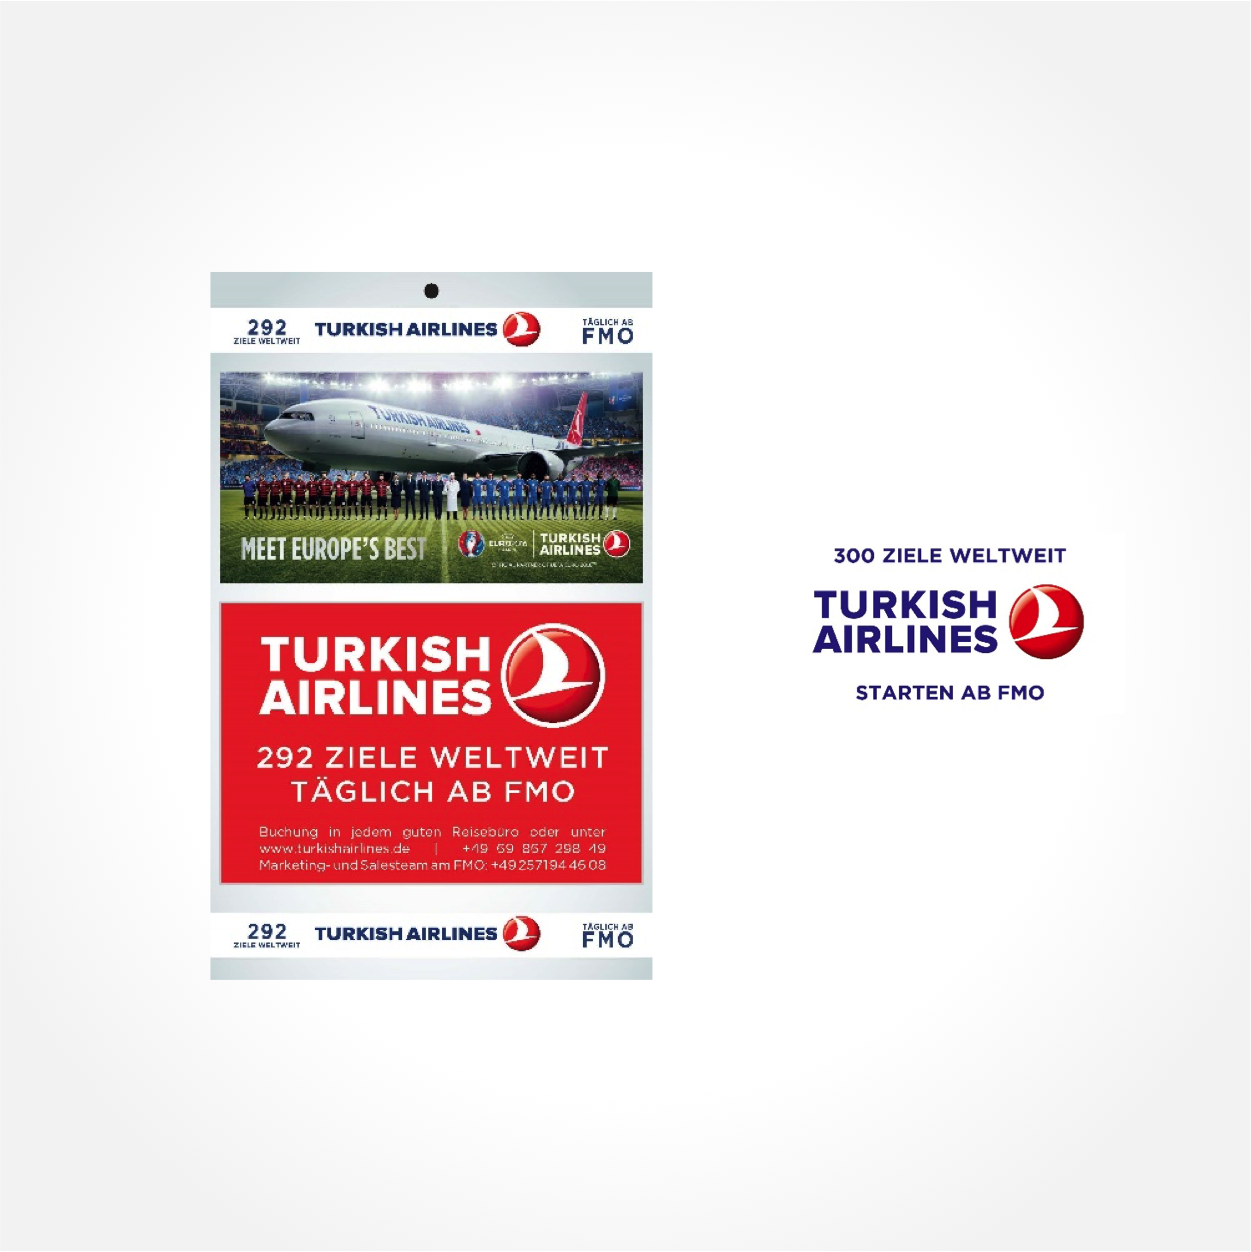 Turkish Airlines & FMO